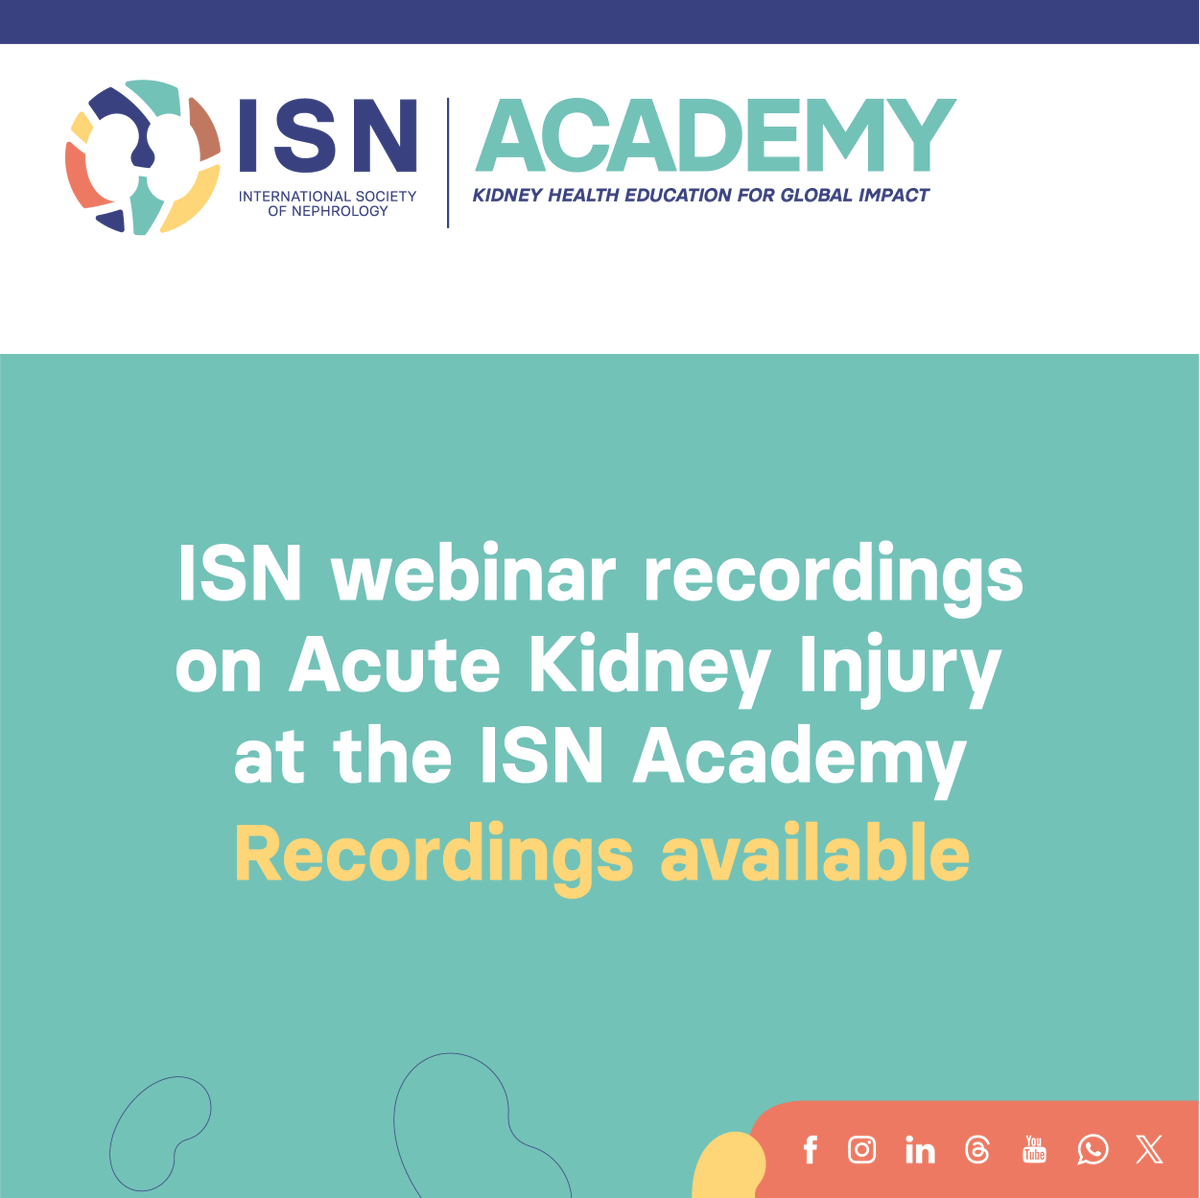 4⃣ ISN webinar recordings on AKI at the ISN Academy 🔸Nuances in Nephrology Webinar: The Continuum of AKI, AKD, and CKD: Predictive Biomarkers academy.theisn.org/products/at-is… 🔸ISN-@AfricanAFRAN Webinar: AKI in Limited-resource Settings academy.theisn.org/products/isn-a… 🔸Nuances in Nephrology